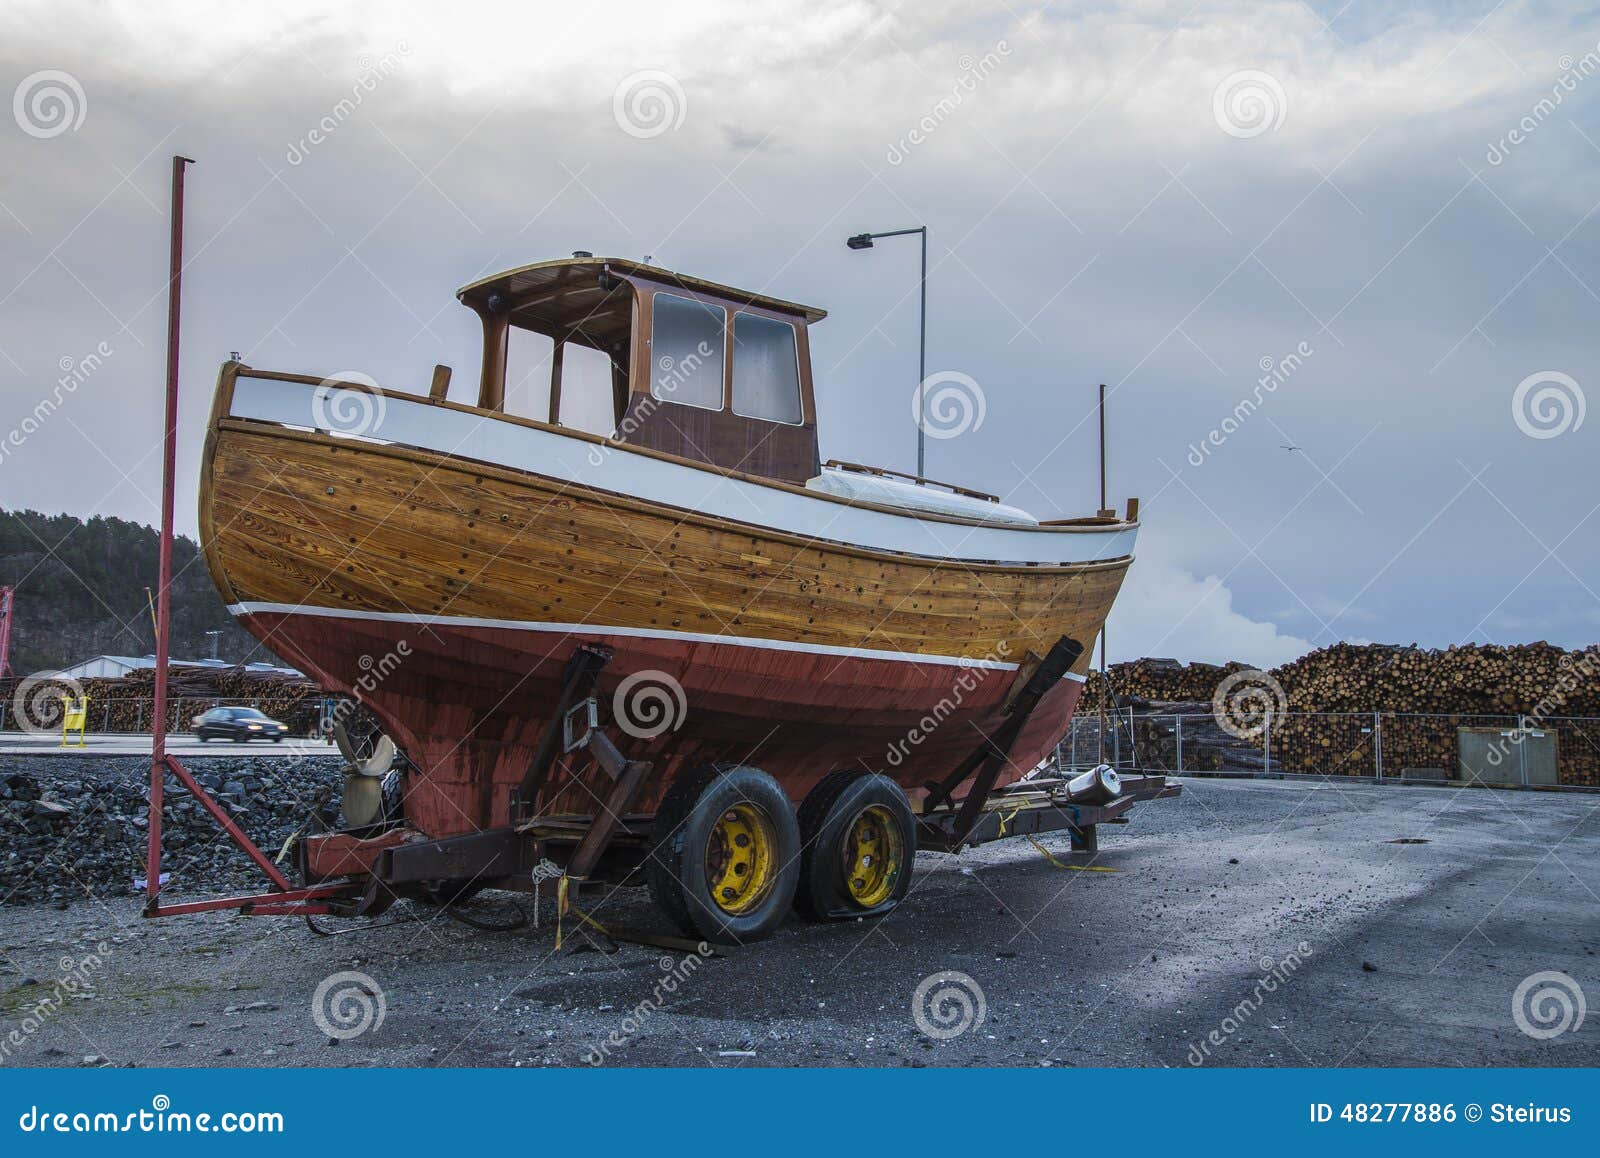 Nice Clinker Built Wooden Boat Editorial Photo - Image of outdoors, house:  48277886